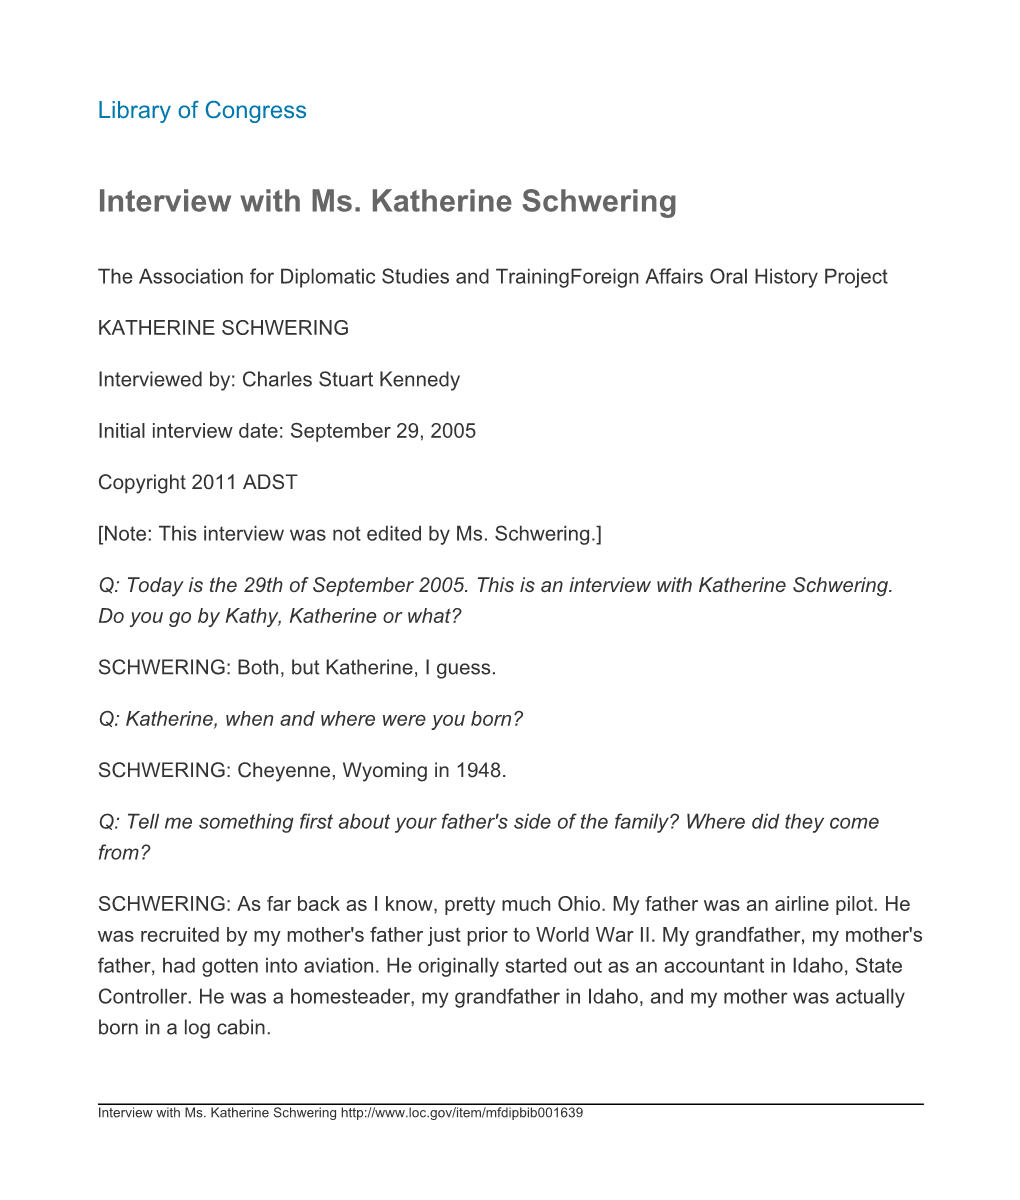 Interview with Ms. Katherine Schwering